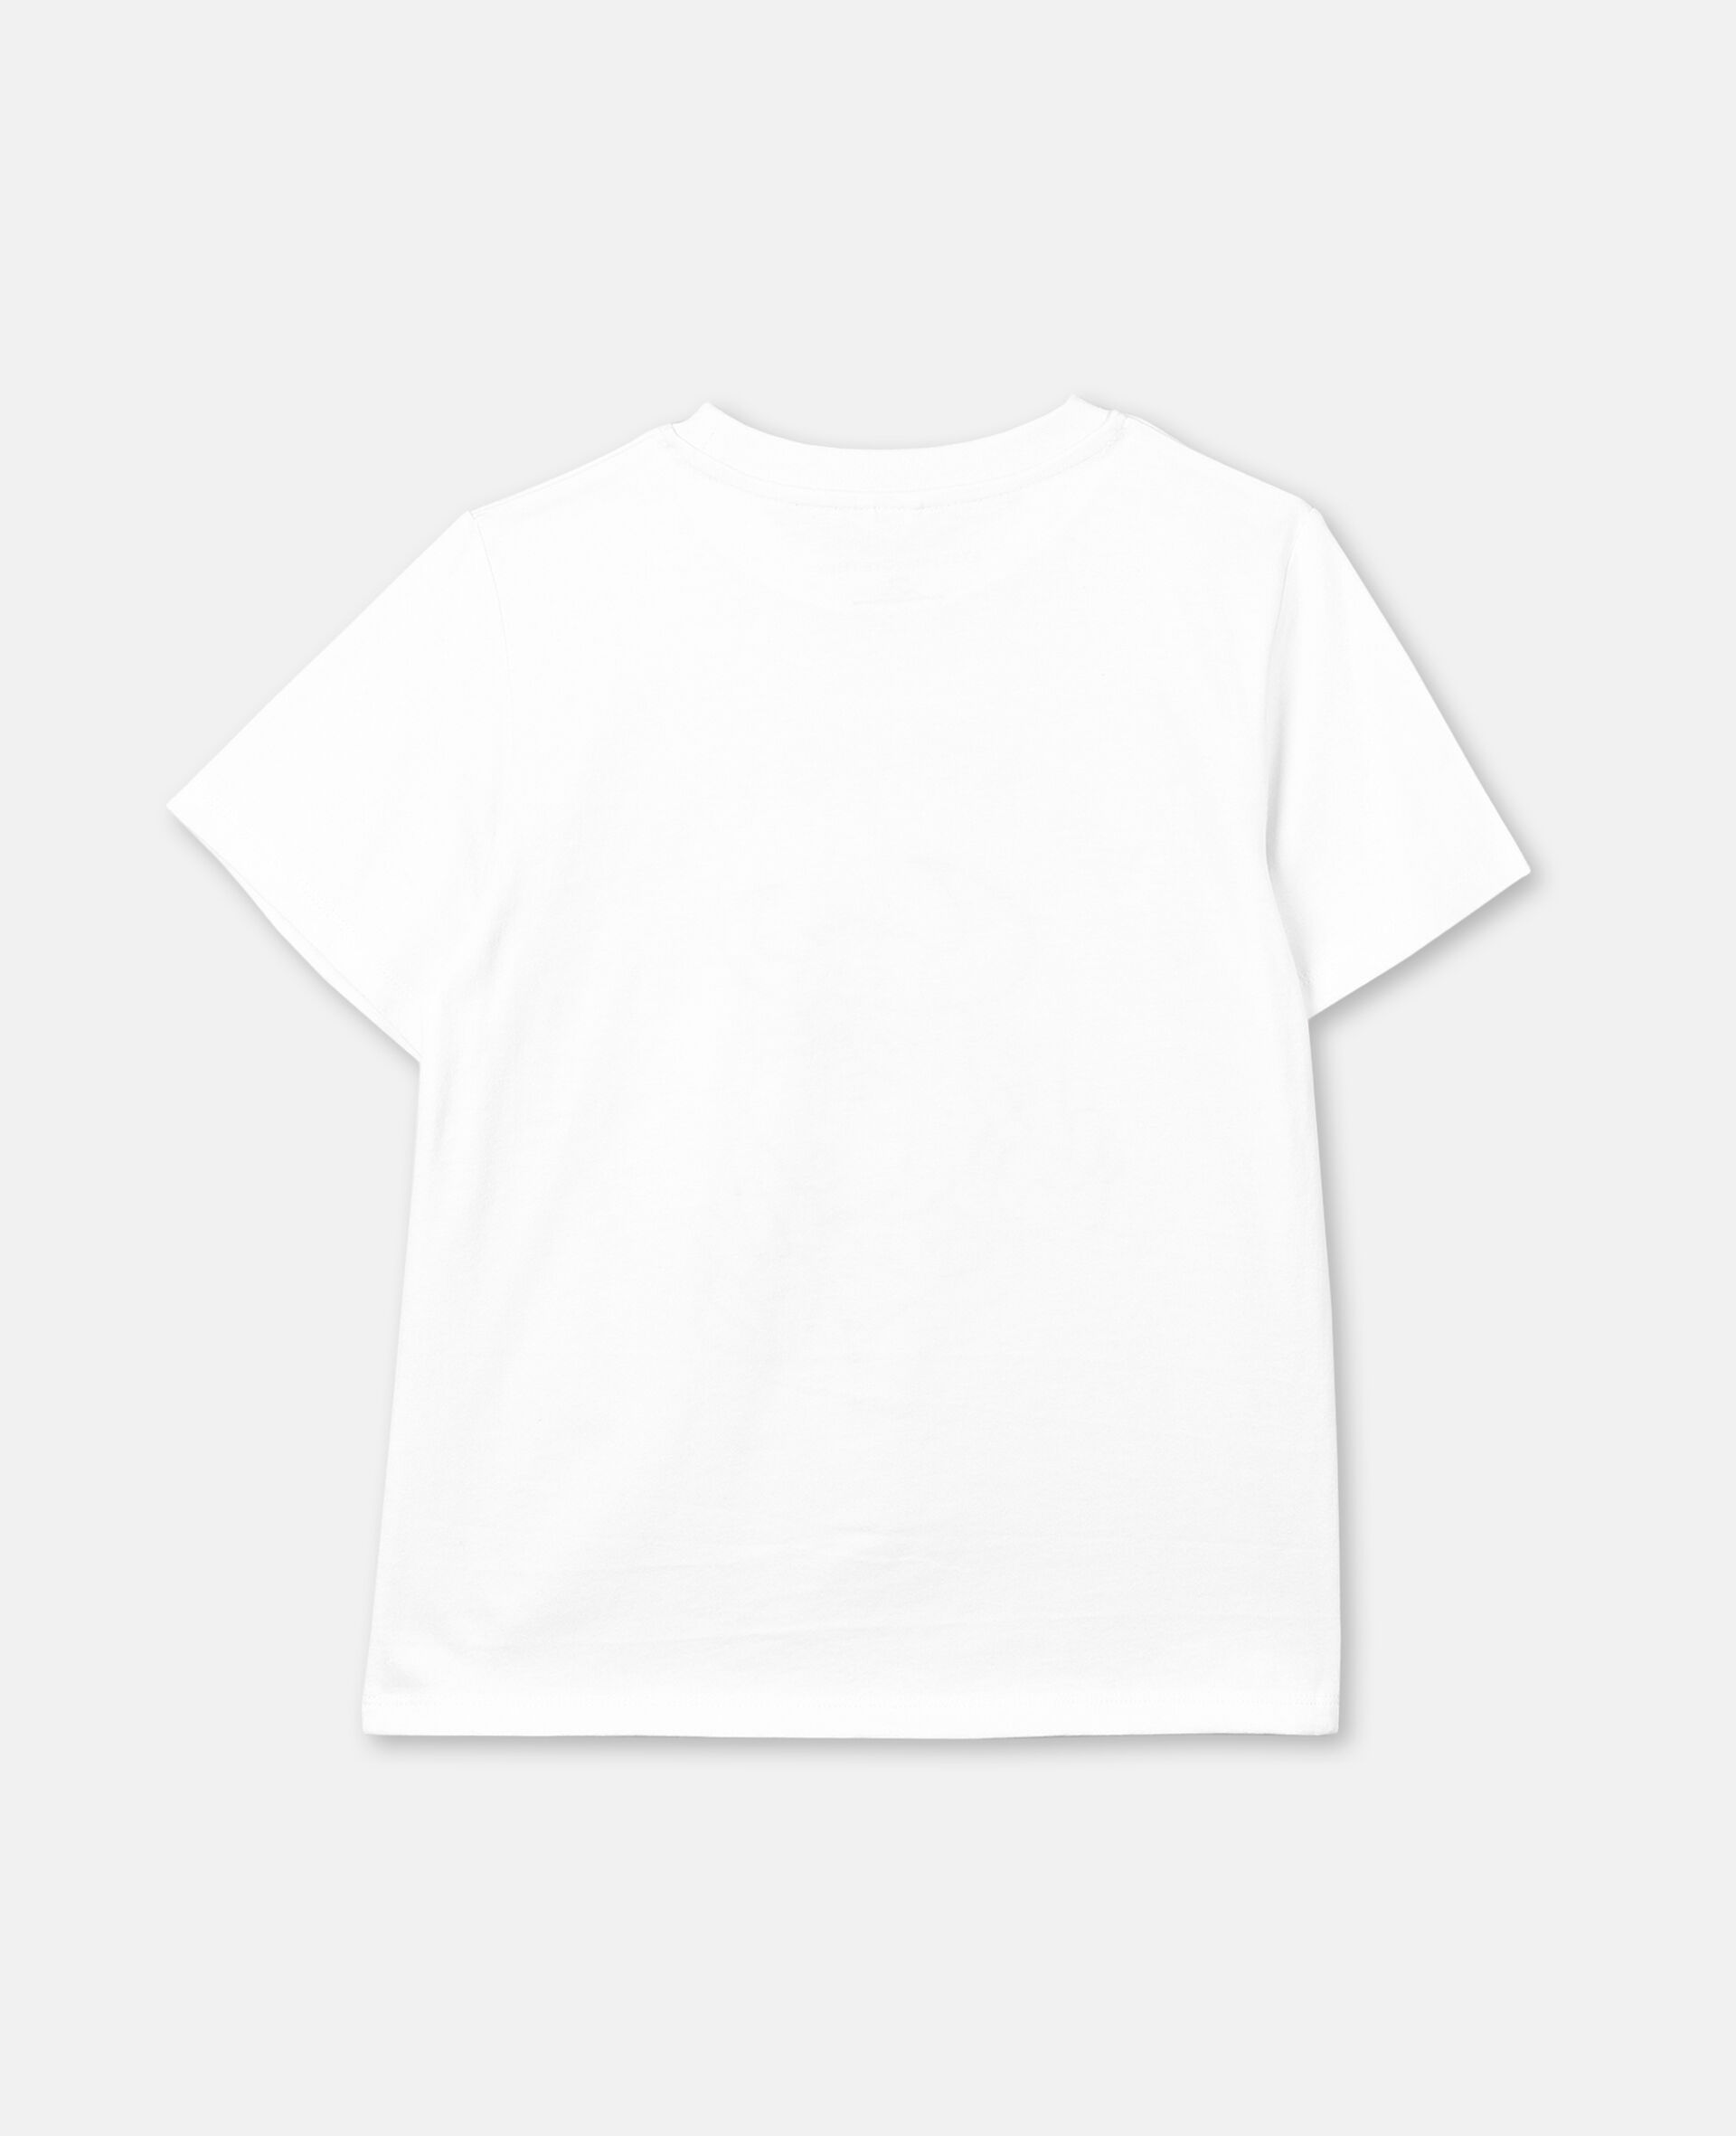 Lunar New Year Cotton T-shirt -White-large image number 3